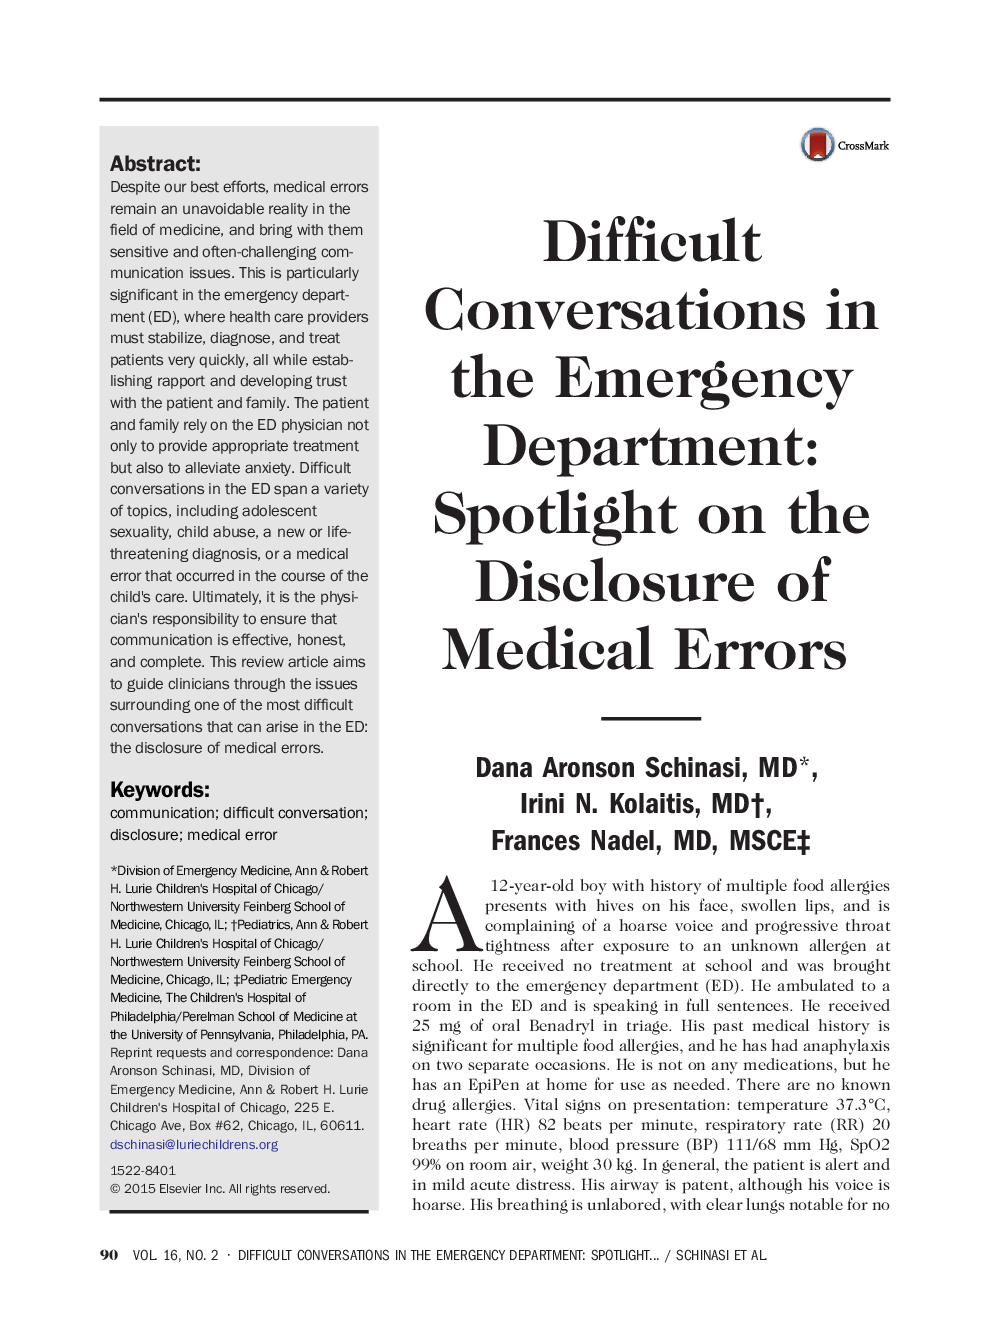 Difficult Conversations in the Emergency Department: Spotlight on the Disclosure of Medical Errors 